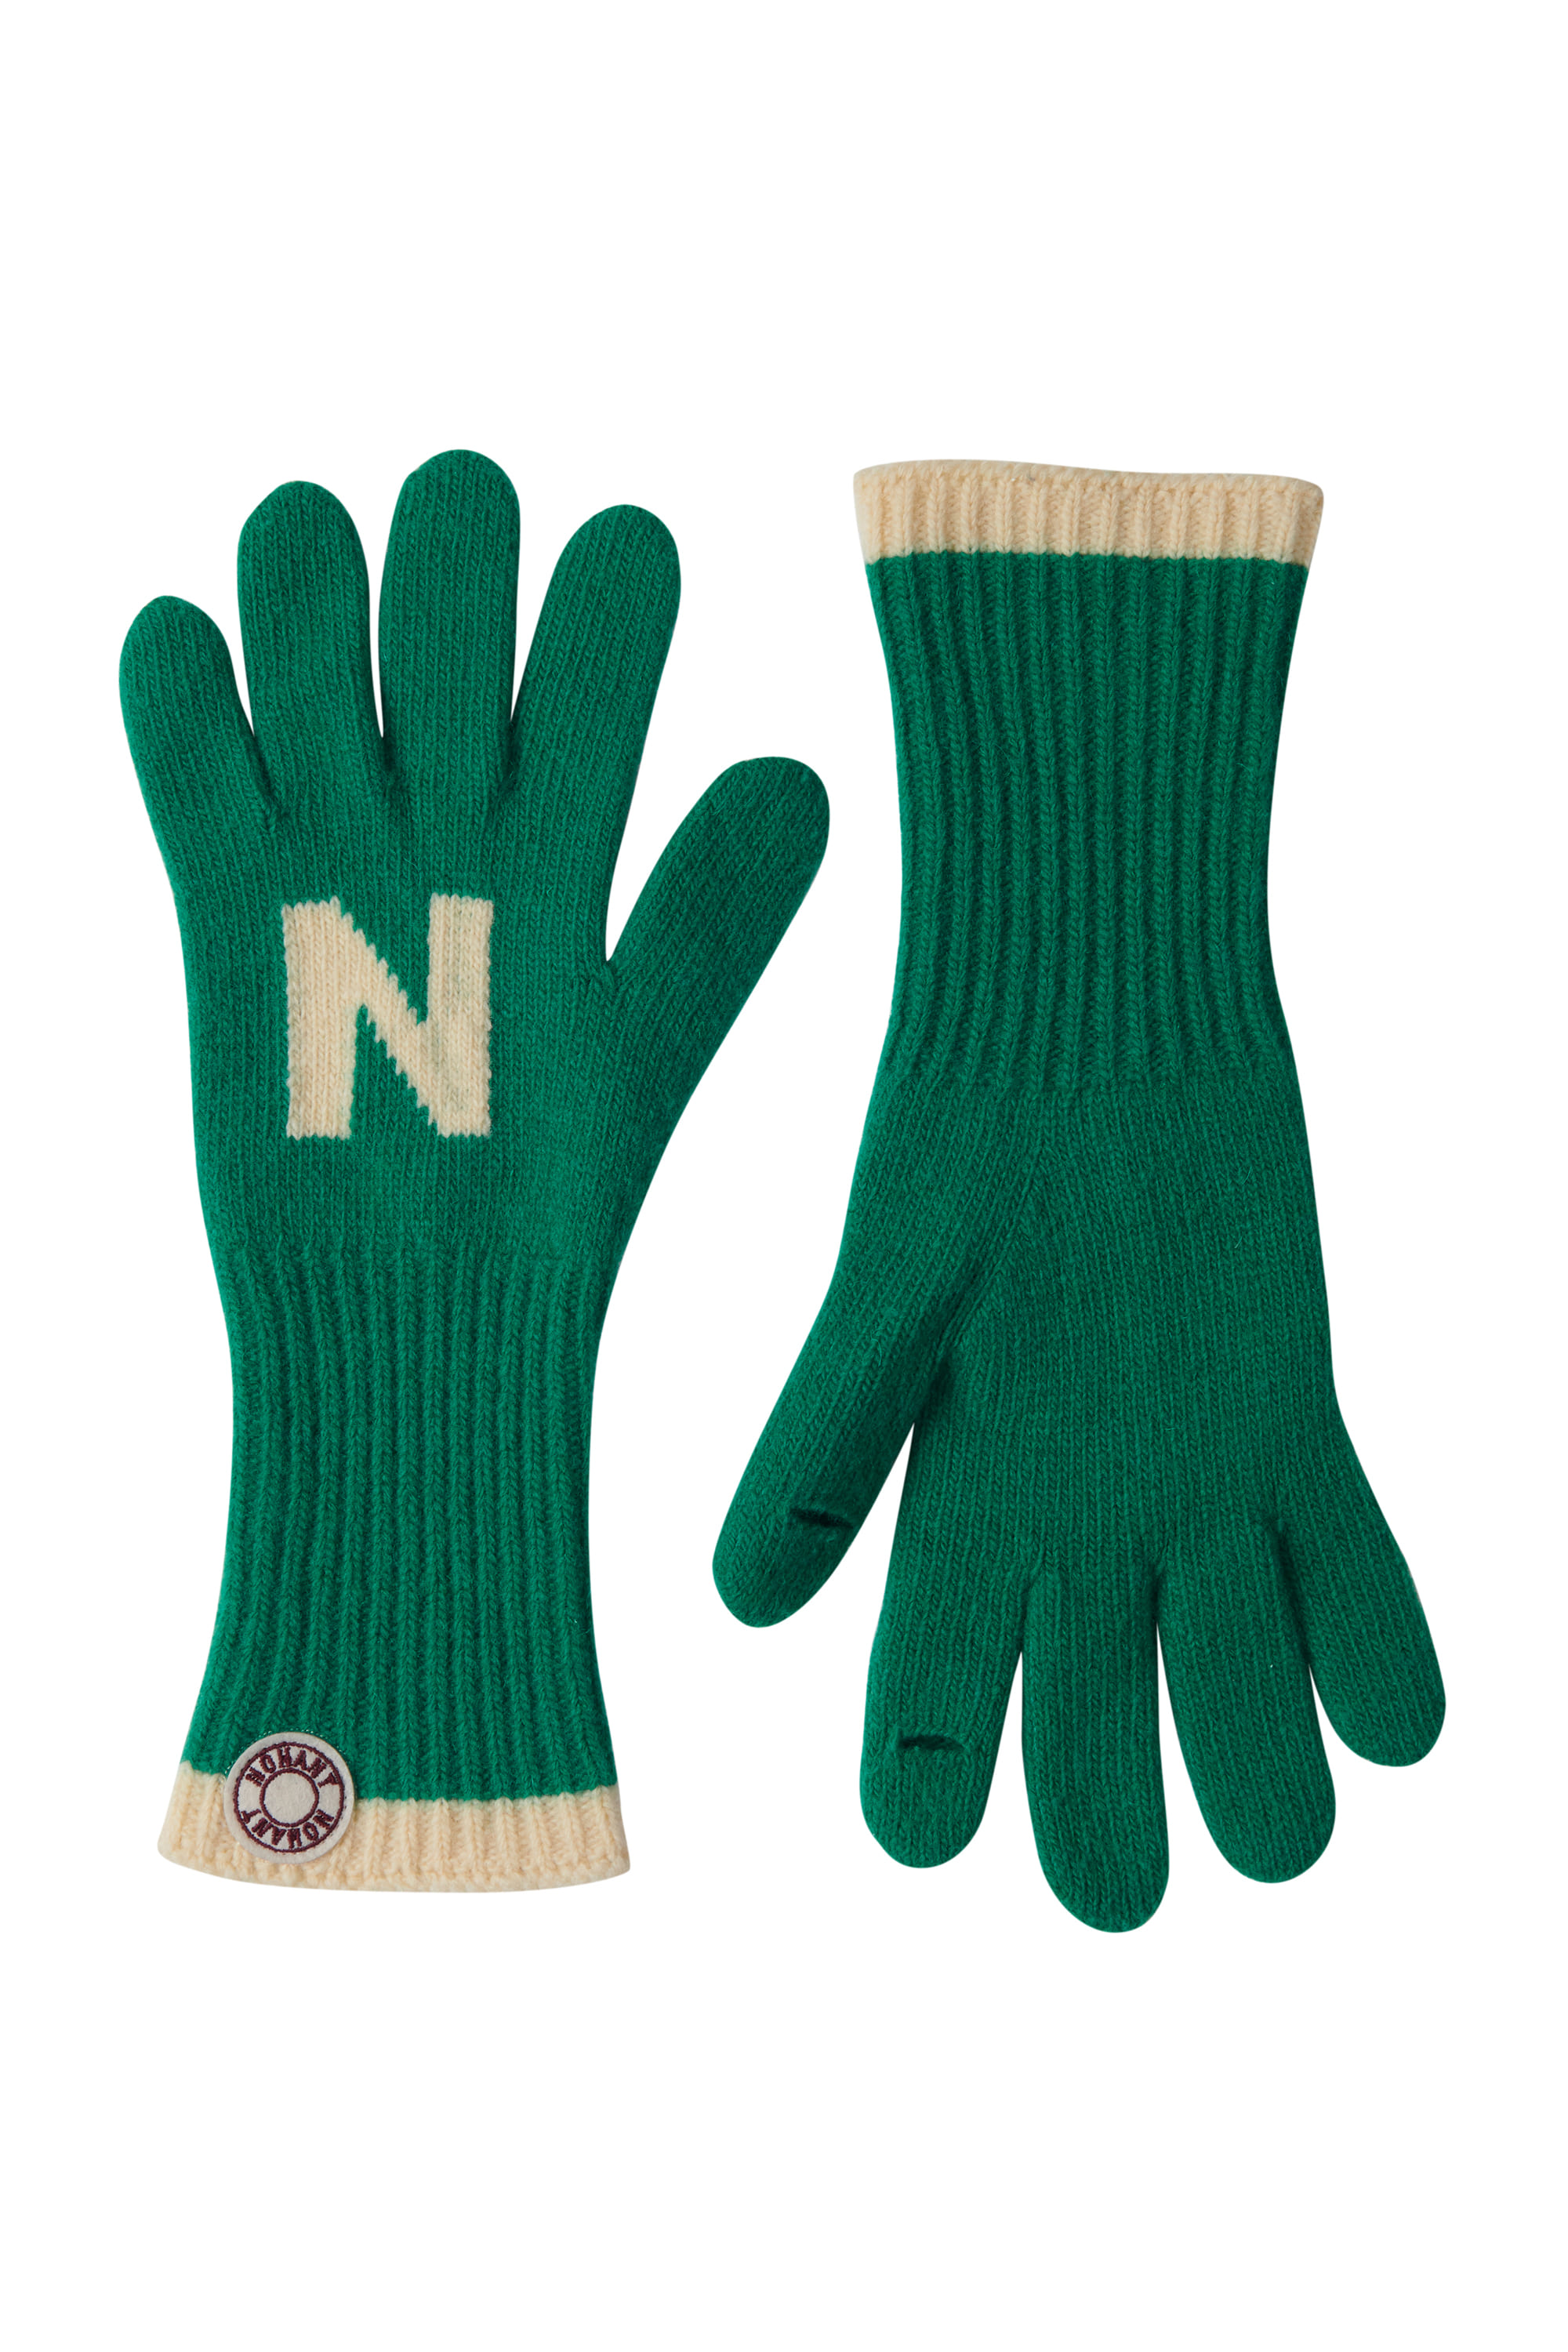 [CARRY OVER] LOGO PATCH KNIT GLOVES GREEN